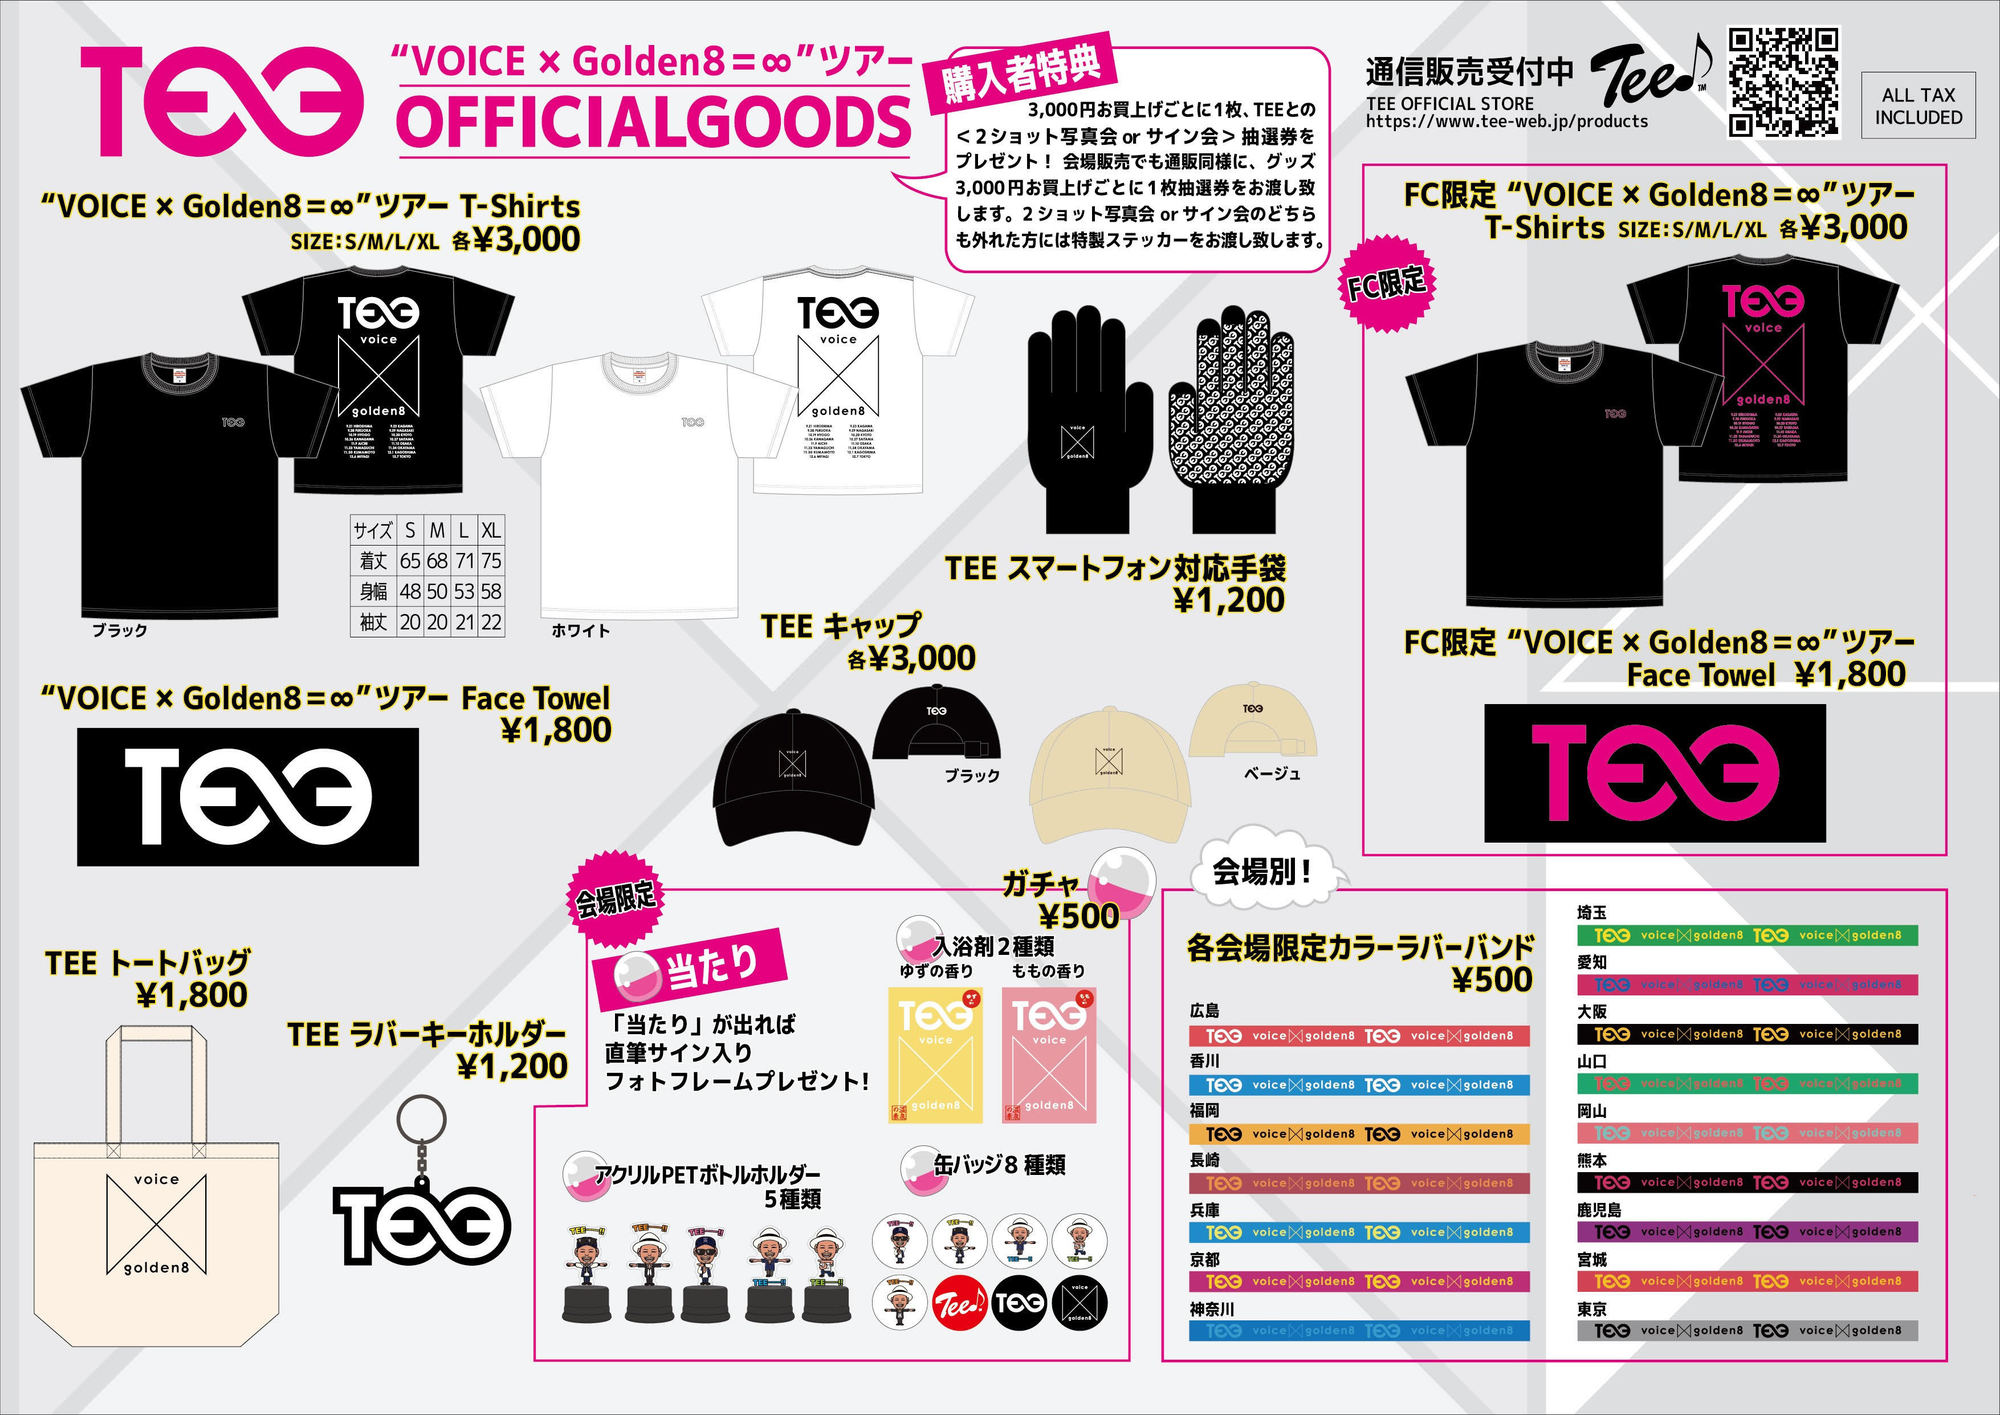 Tee 全国ツアーグッズ最新情報 Tee Official Web Site